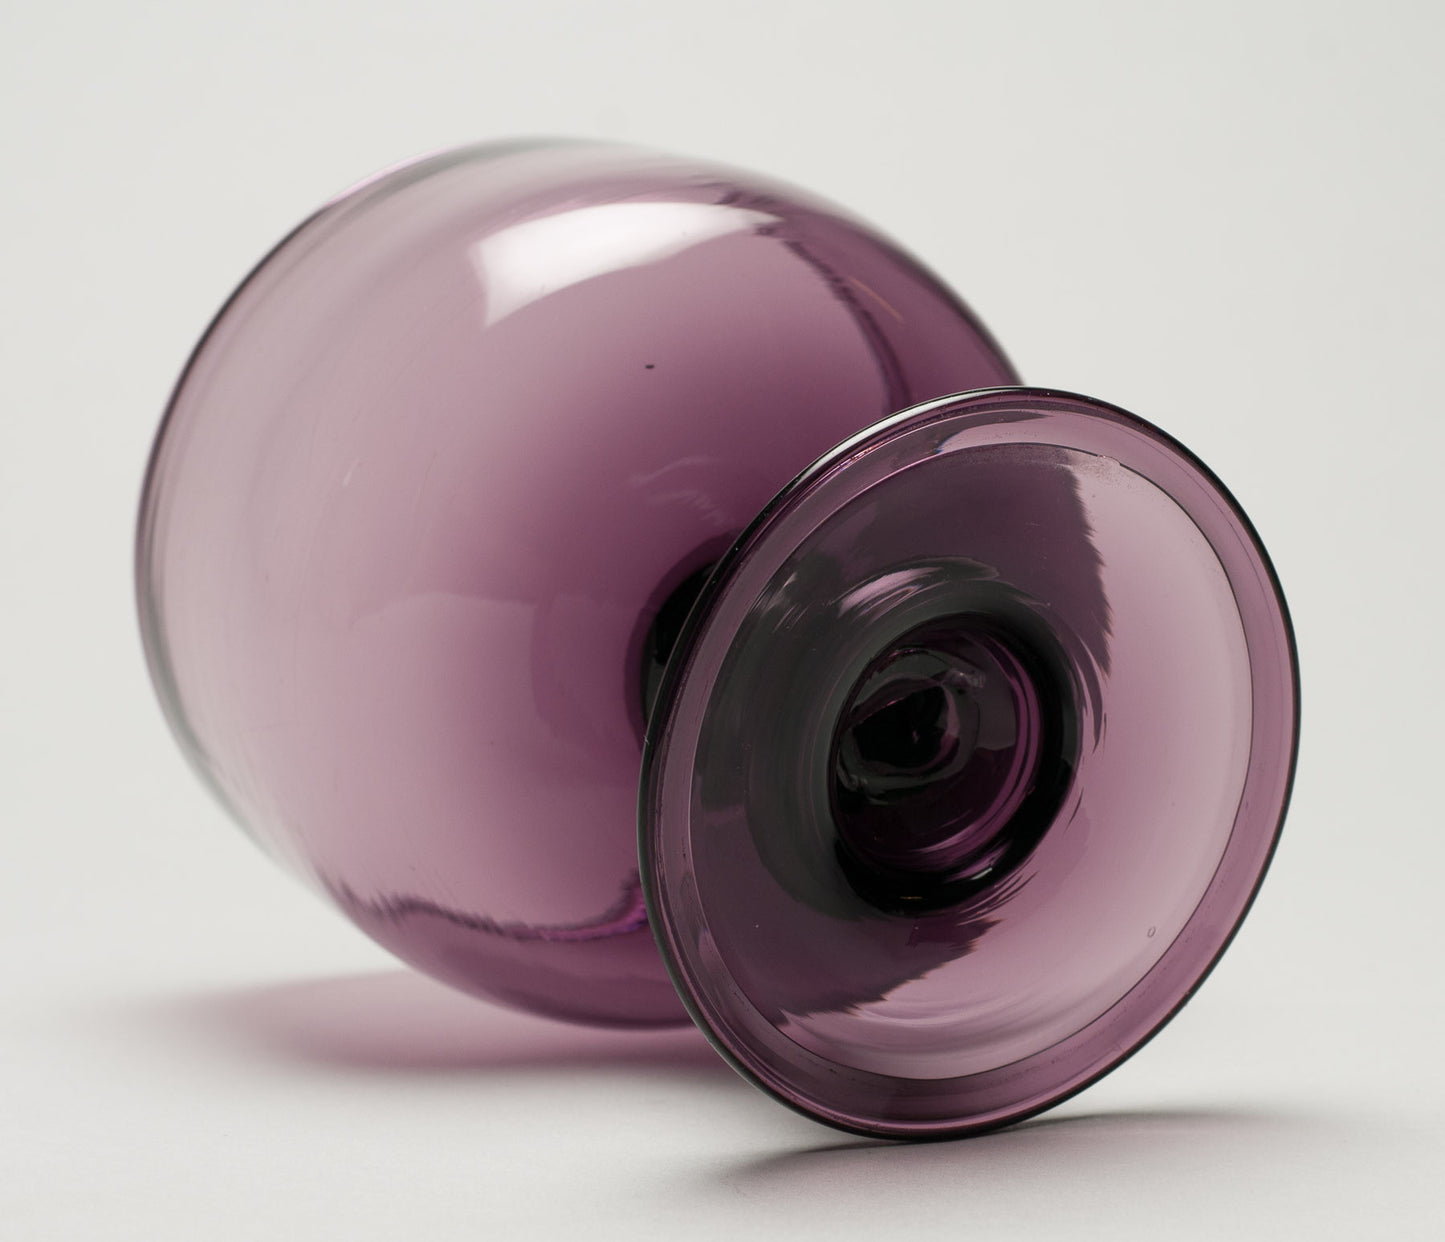 An Antique Georgian Amethyst Glass Rummer or Sweetmeat Glass with Folded Foot (Code 0347)